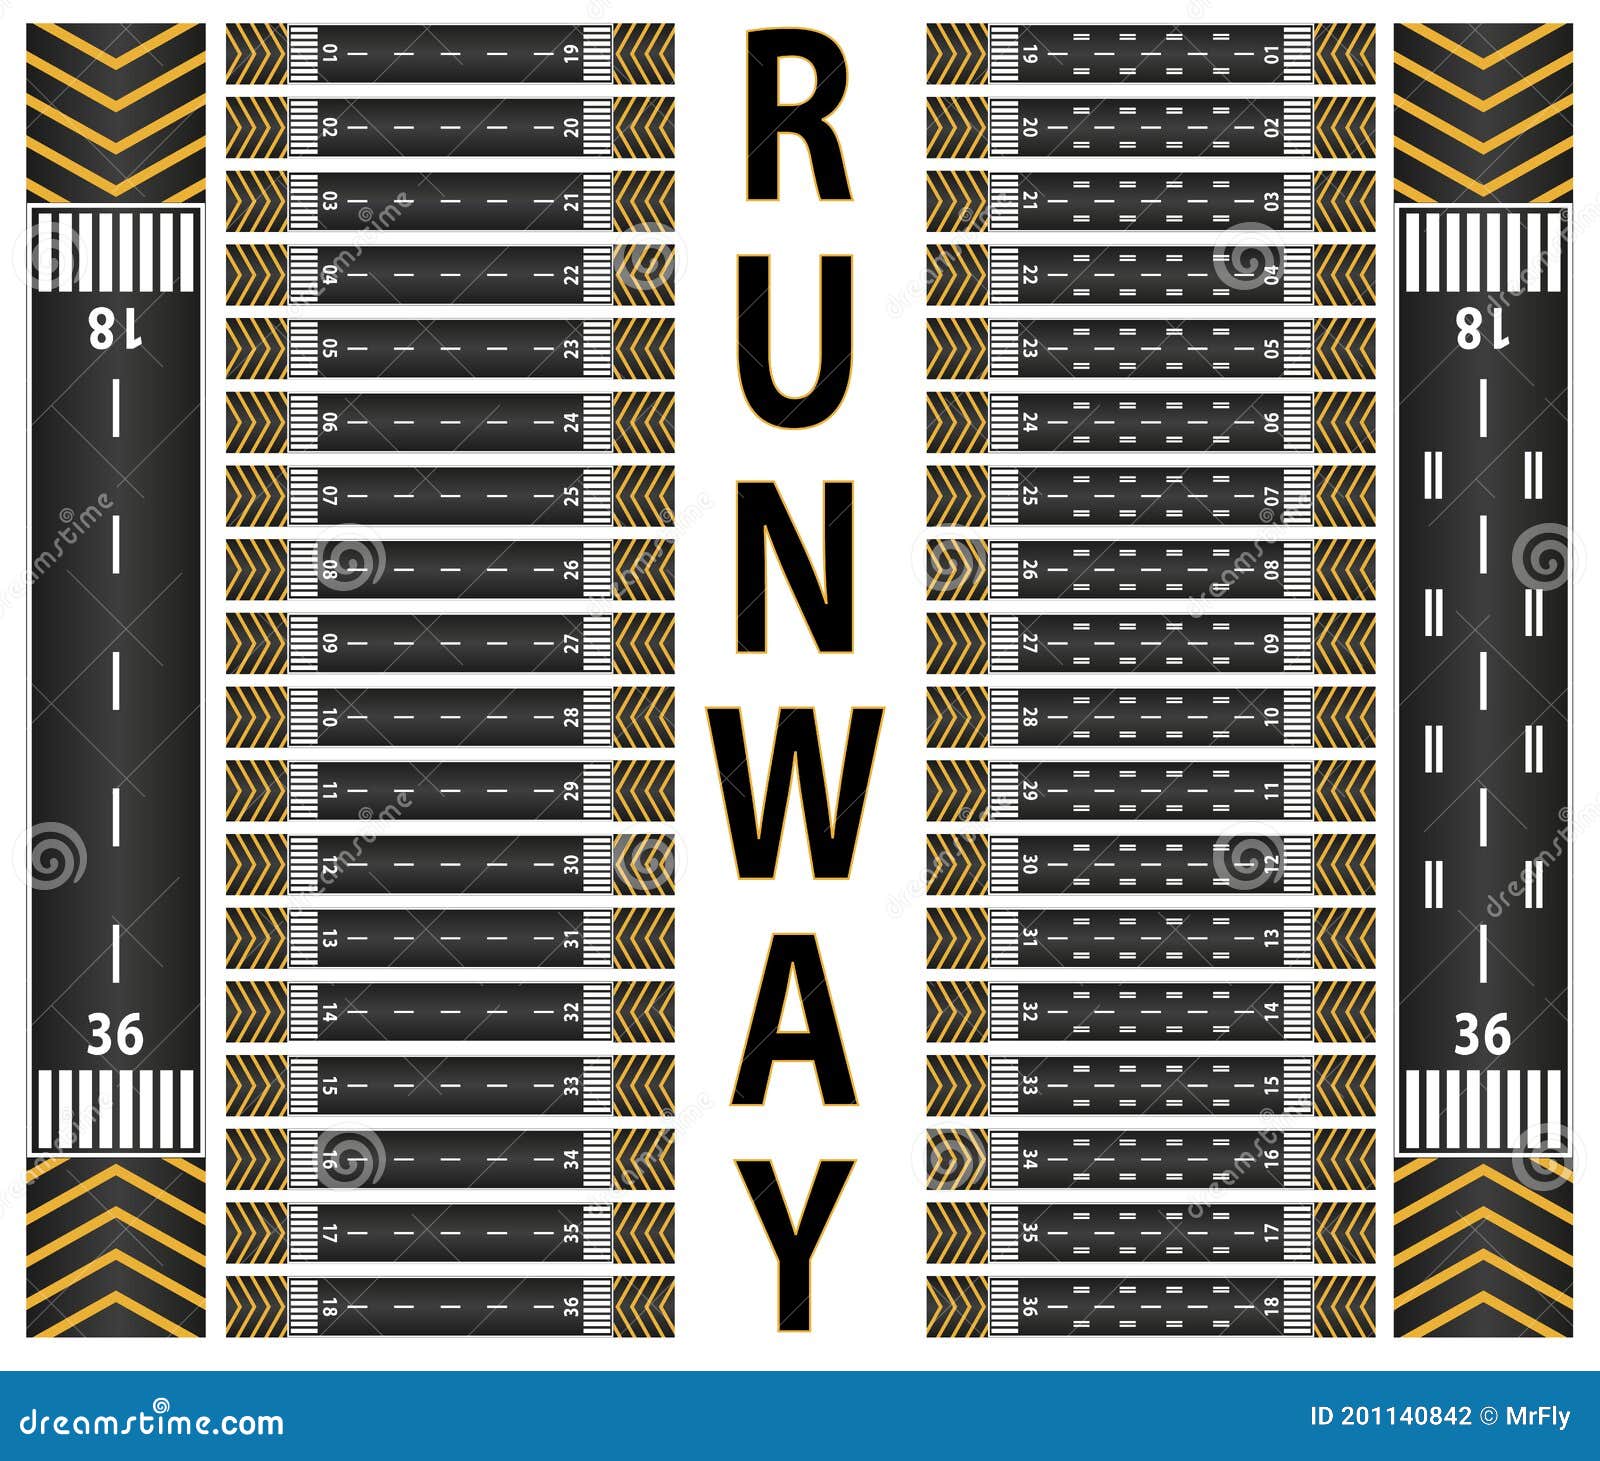 available-runways-stock-illustrations-2-available-runways-stock